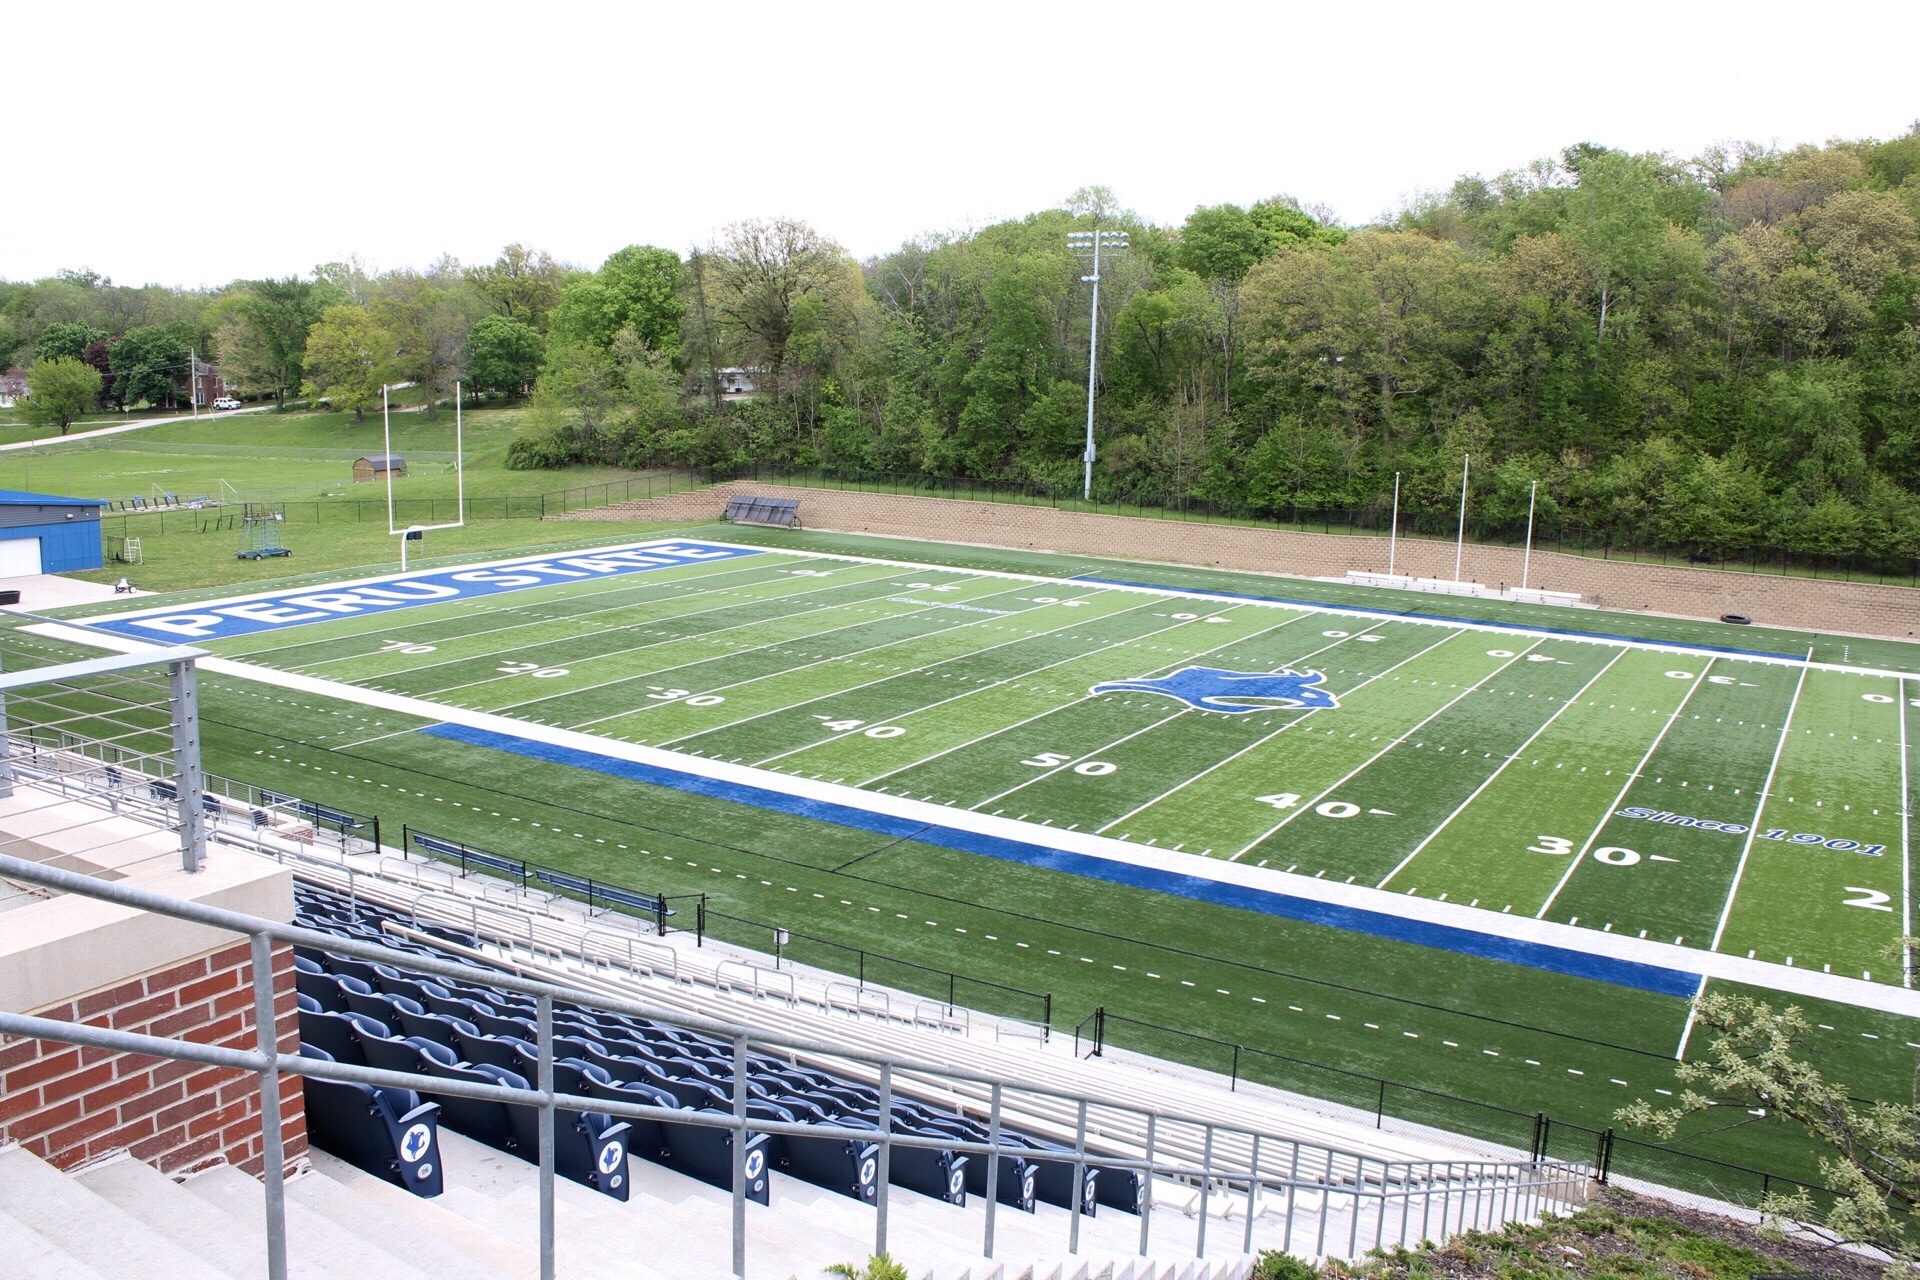 View of the field from the right side of the stadium.